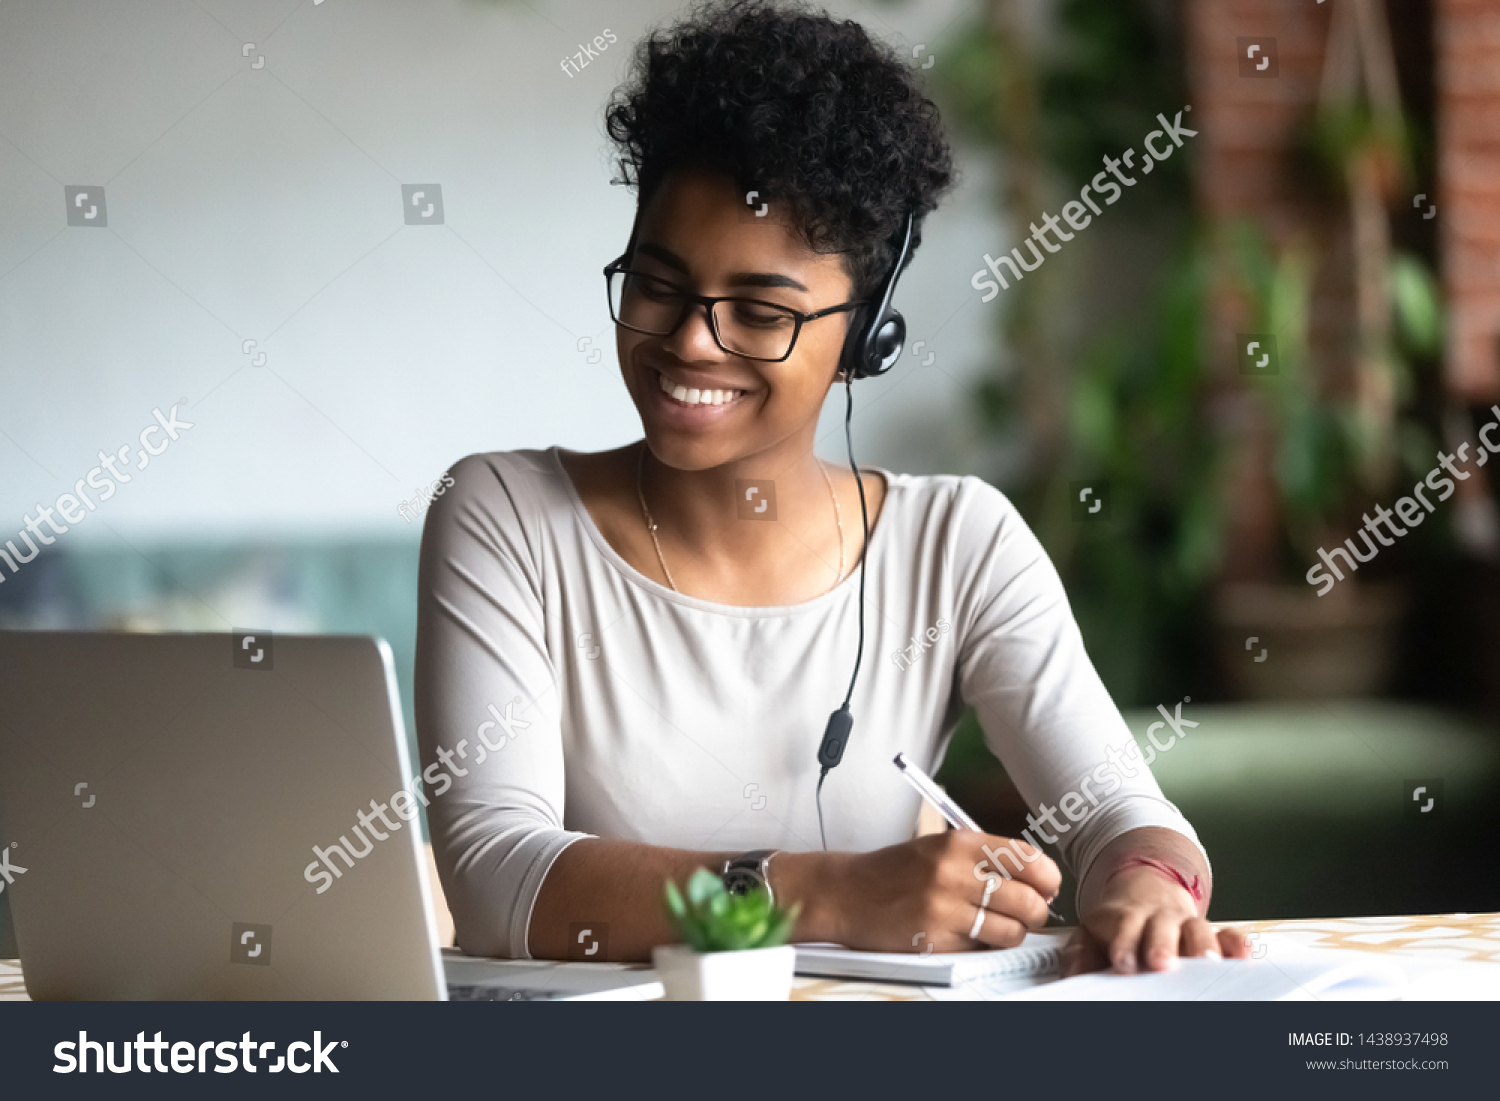 Smiling african American millennial female student in headphones and glasses sit at desk watch webinar making notes, happy biracial young woman in earphones work study using computer write in notebook #1438937498